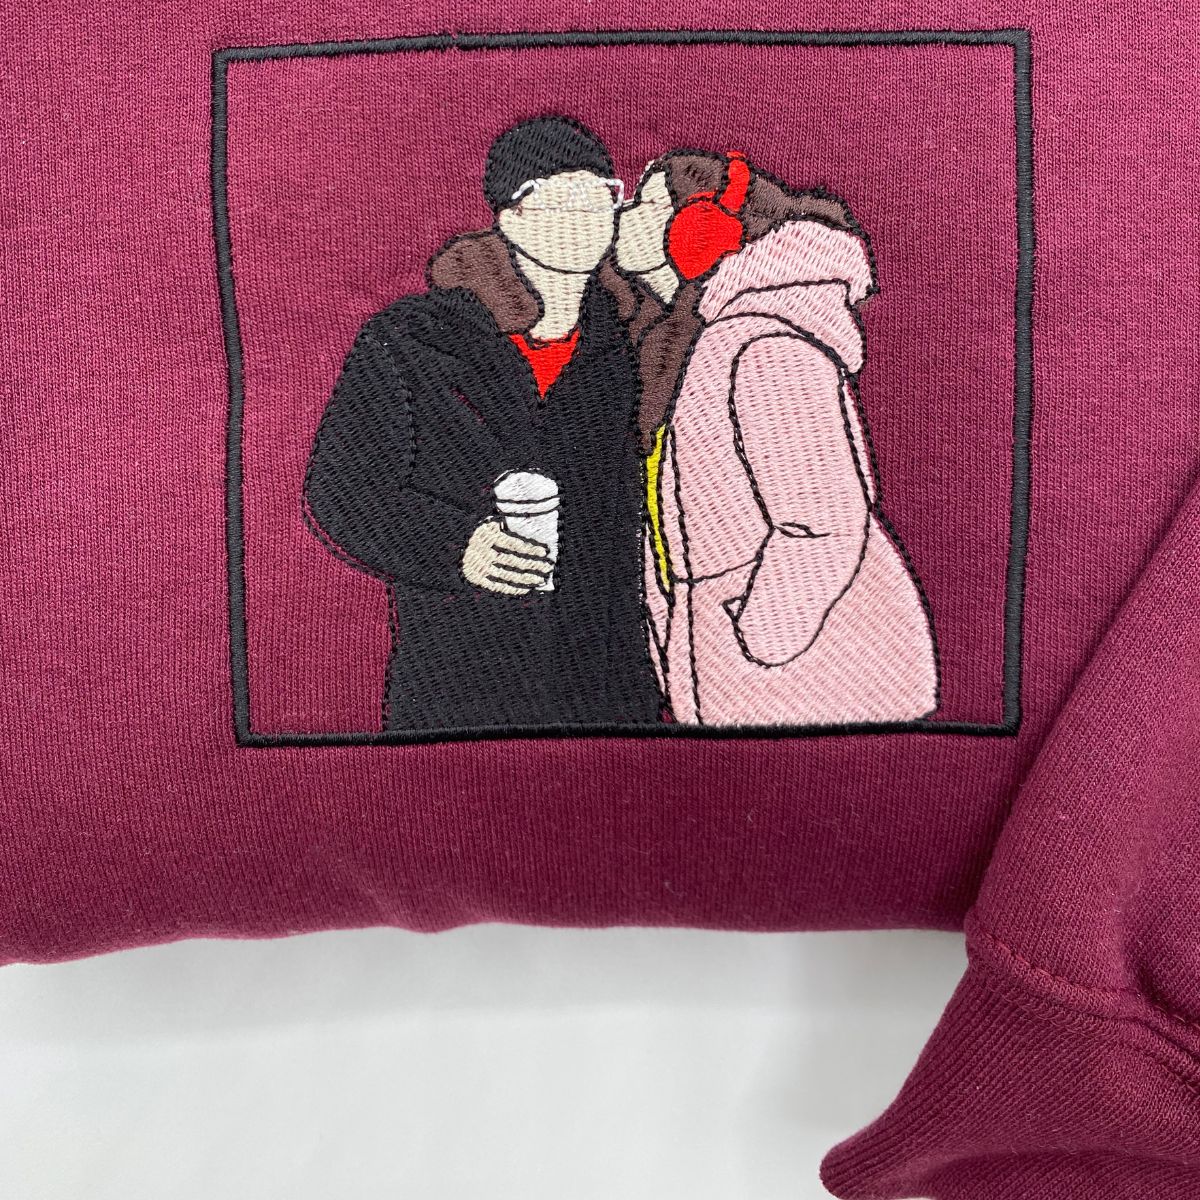 Personalized Embroidered Hoodies with Pictures